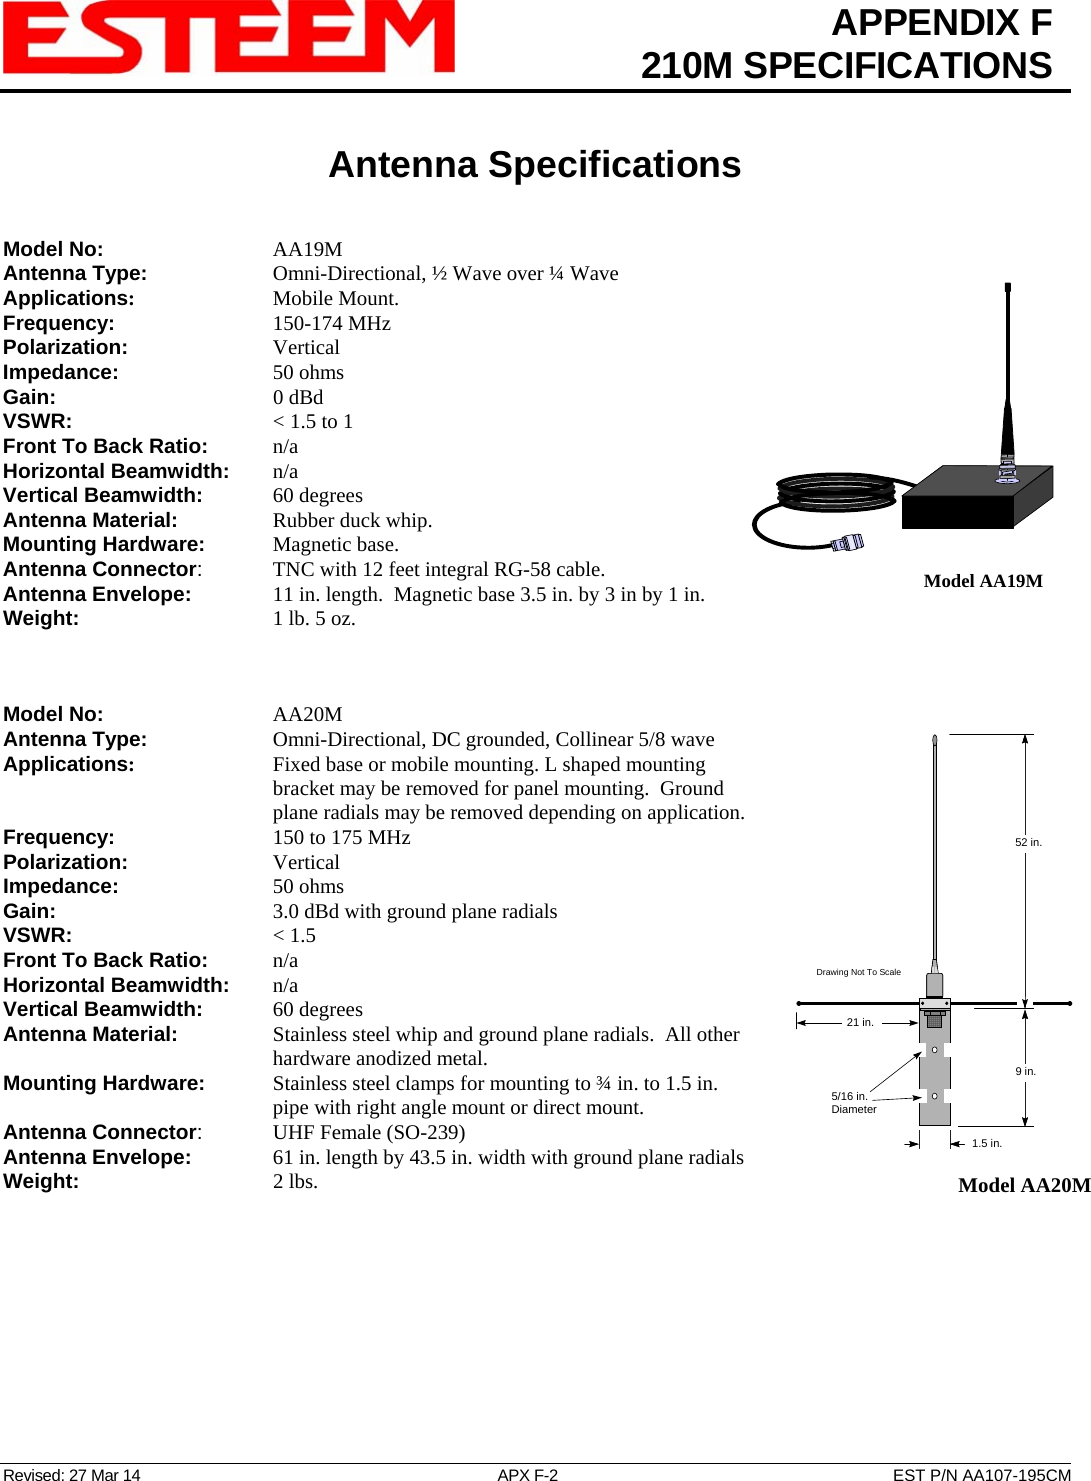  APPENDIX F  210M SPECIFICATIONS   Antenna Specifications   Revised: 27 Mar 14  APX F-2  EST P/N AA107-195CM Model No:    AA19M Antenna Type:   Omni-Directional, ½ Wave over ¼ Wave Applications:    Mobile Mount. Frequency:    150-174 MHz  Polarization:    Vertical Impedance:    50 ohms Gain:     0 dBd VSWR:      &lt; 1.5 to 1  Front To Back Ratio:   n/a Horizontal Beamwidth:  n/a Vertical Beamwidth:      60 degrees Antenna Material:     Rubber duck whip.  Mounting Hardware:      Magnetic base.  Antenna Connector:    TNC with 12 feet integral RG-58 cable. Antenna Envelope:   11 in. length.  Magnetic base 3.5 in. by 3 in by 1 in.  Model AA19MWeight:           1 lb. 5 oz.     Model No:    AA20M Antenna Type:   Omni-Directional, DC grounded, Collinear 5/8 wave  Applications:       Fixed base or mobile mounting. L shaped mounting bracket may be removed for panel mounting.  Ground plane radials may be removed depending on application. Frequency:    150 to 175 MHz  Polarization:    Vertical Impedance:    50 ohms Gain:          3.0 dBd with ground plane radials VSWR:      &lt; 1.5  Front To Back Ratio:   n/a Horizontal Beamwidth:  n/a Vertical Beamwidth:      60 degrees Antenna Material:     Stainless steel whip and ground plane radials.  All other hardware anodized metal.  Mounting Hardware:      Stainless steel clamps for mounting to ¾ in. to 1.5 in. pipe with right angle mount or direct mount.  Antenna Connector:    UHF Female (SO-239) Antenna Envelope:   61 in. length by 43.5 in. width with ground plane radials  1.5 in.9 in.Drawing Not To Scale5/16 in.Diameter52 in.21 in.Model AA20M  Weight:       2 lbs. 